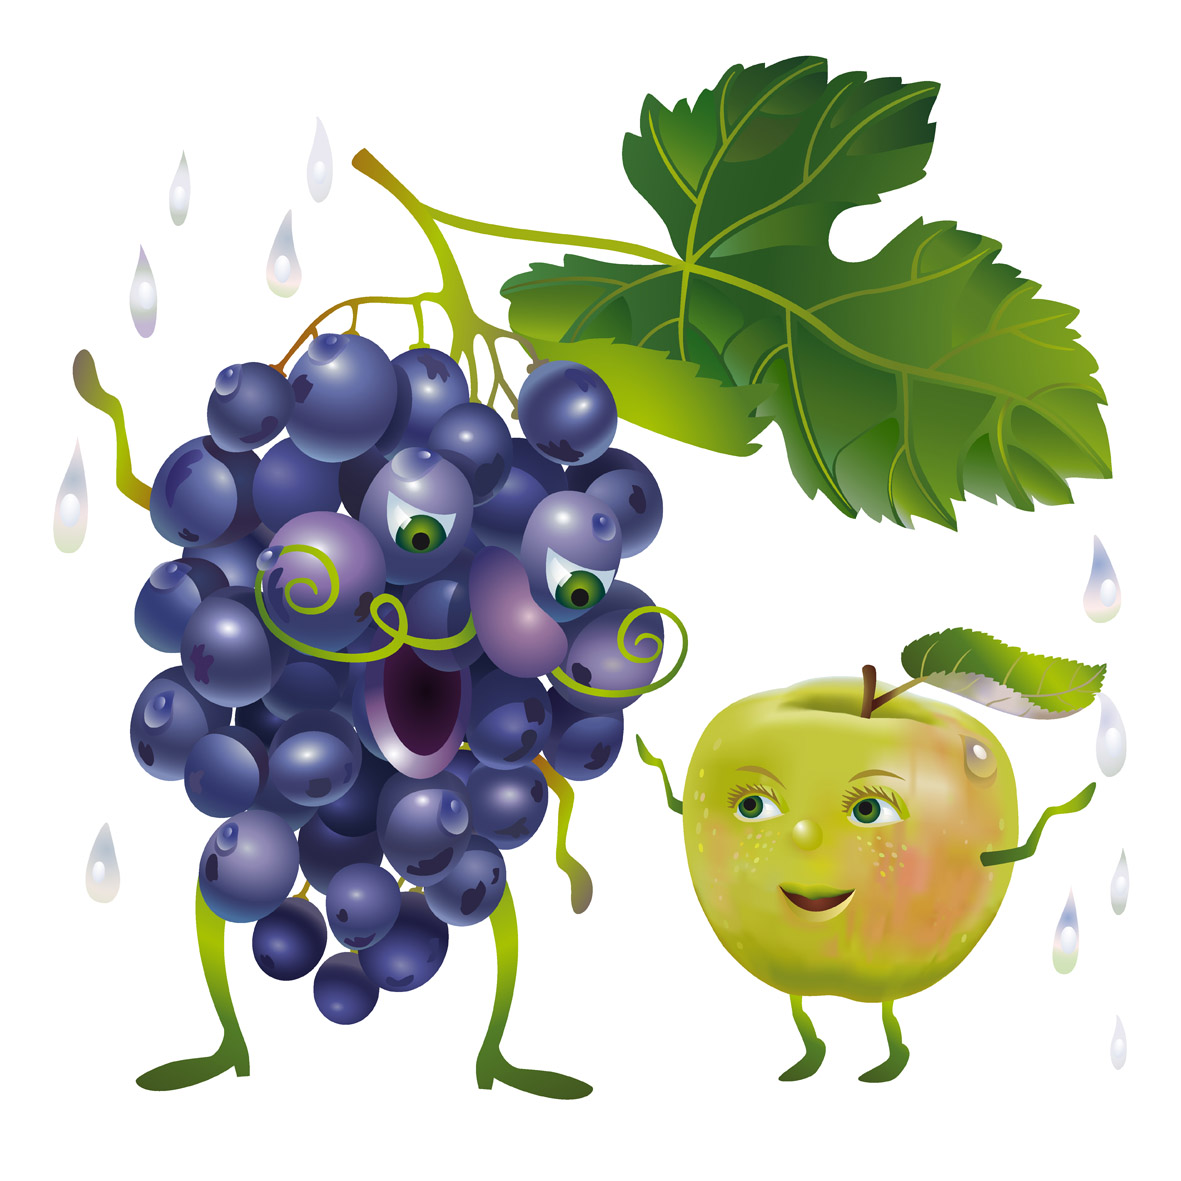 Apple and grape character